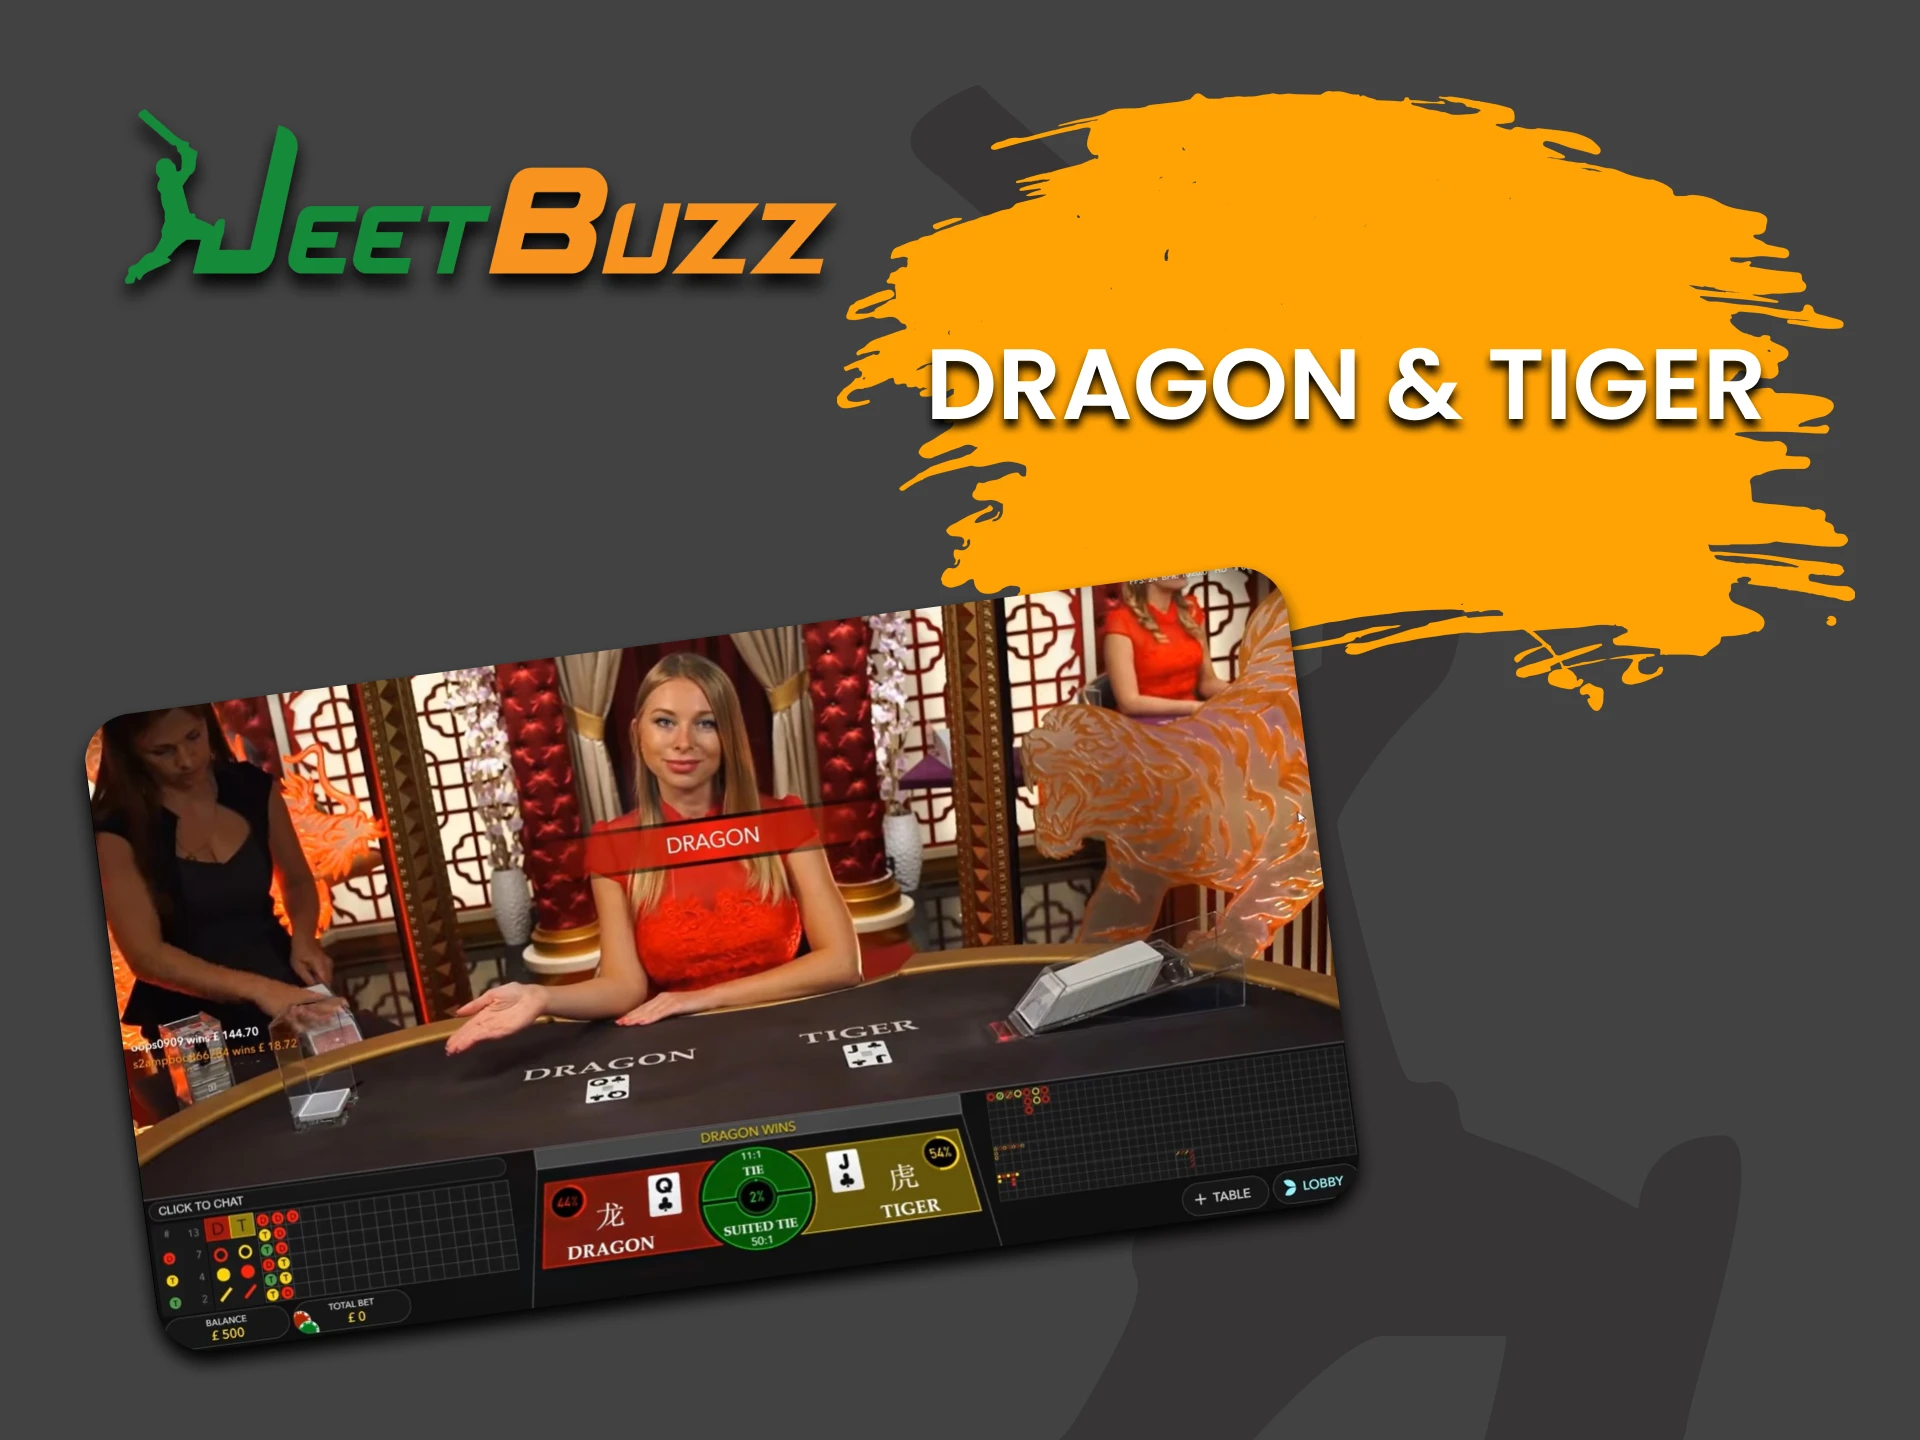 For table games from JeetBuzz, choose Dragon and Tiger.